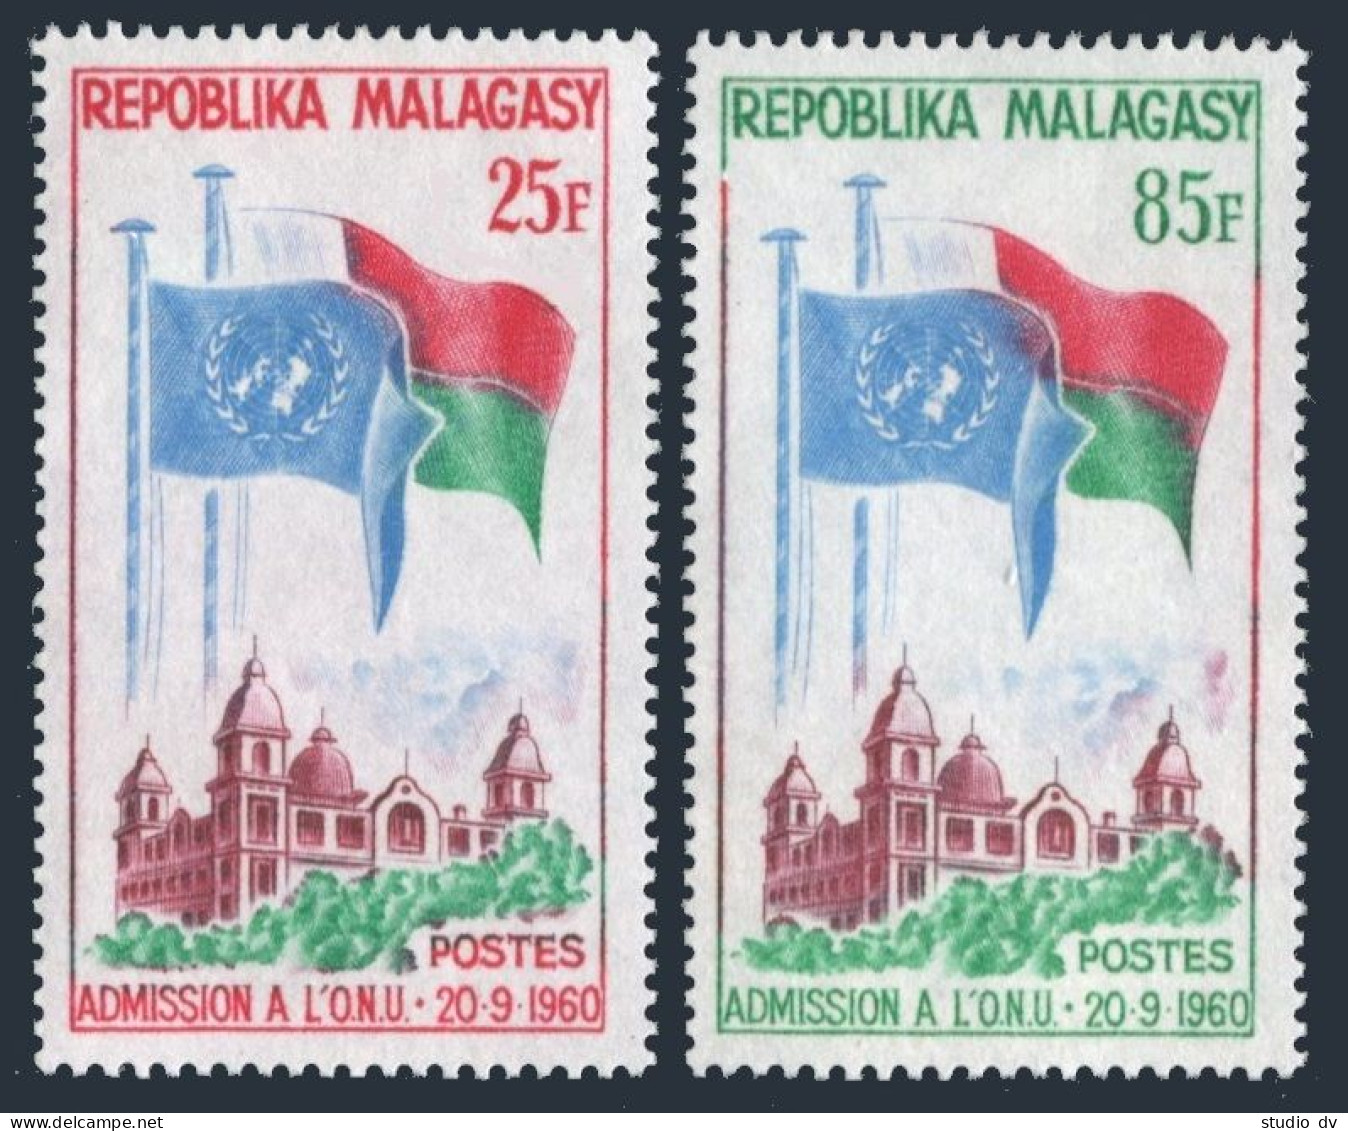 Malagasy 326-327,MNH. Mi 475-476. Admission To UN,1962.Flags.Government Building - Madagascar (1960-...)